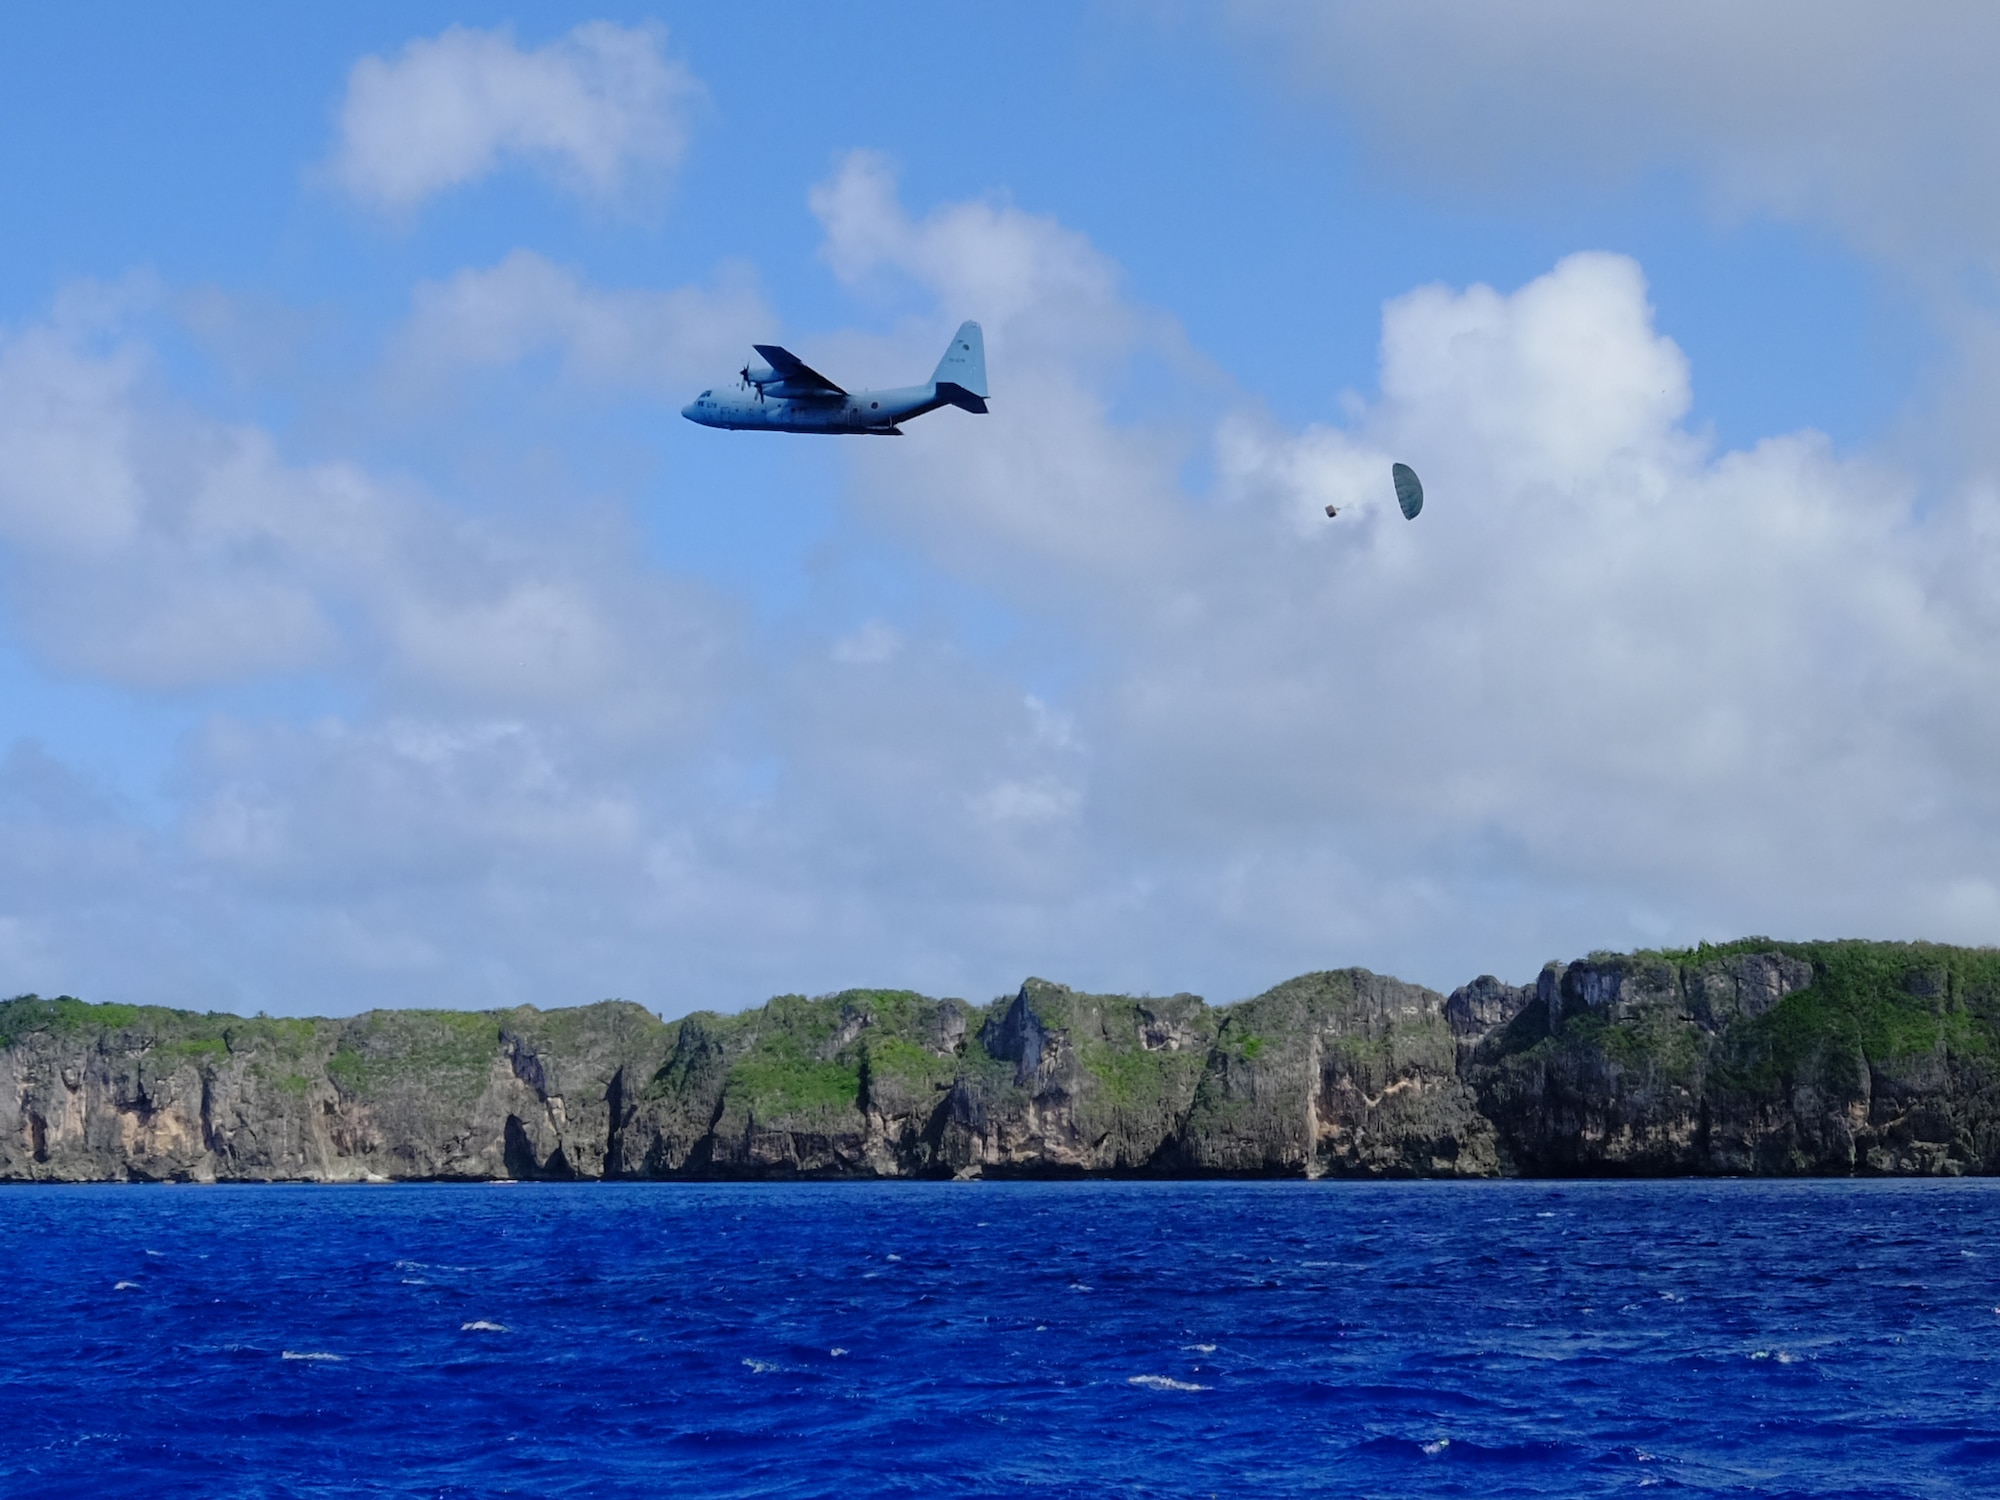 A Japan Air Self-Defense Force C-130H executes a low-cost, low-altitude bundle drop as part of Operation Christmas 2015, Dec. 7, 2015. This year marks the first ever trilateral Operation Christmas Drop where the U.S. Air Force, JASDF and the Royal Australian Air Force work together to provide critical supplies to 56 Micronesian islands while executing partner Humanitarian Aid/Disaster Relief training. (U.S. Air Force photo by Master Sgt. Christopher Bergstrom)